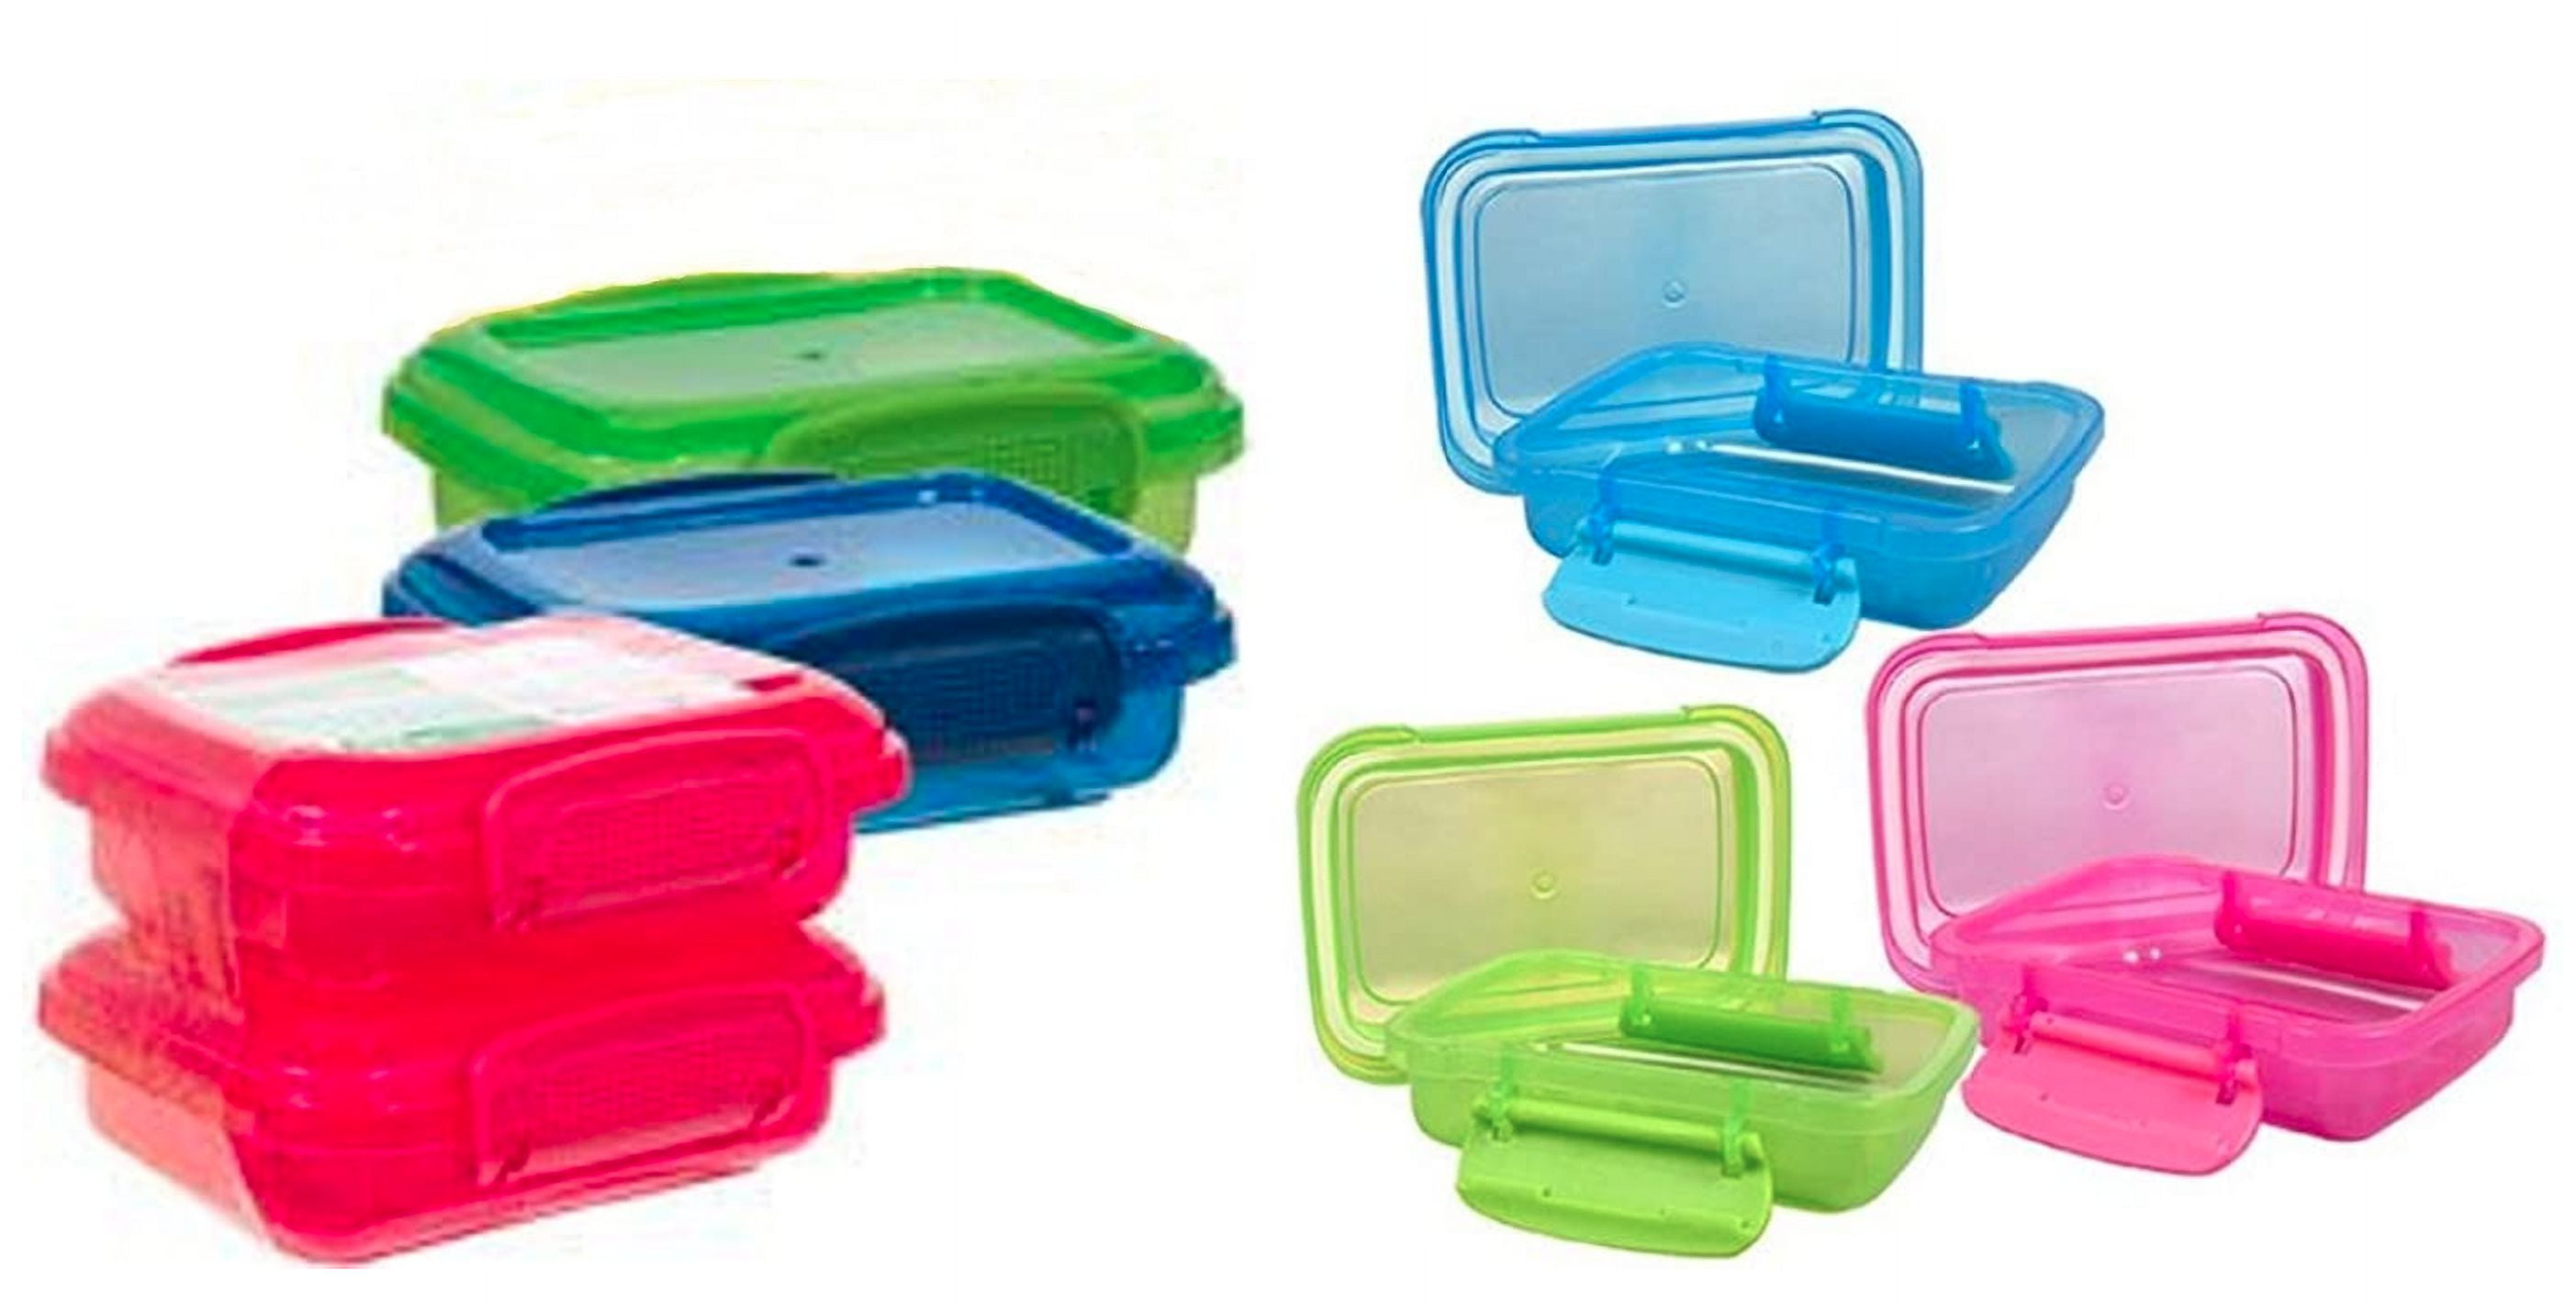 Greenbrier Plastic Storage Containers, Small, Mini, Snap-lock Lids, 6-pc  Set, Colors May Vary 